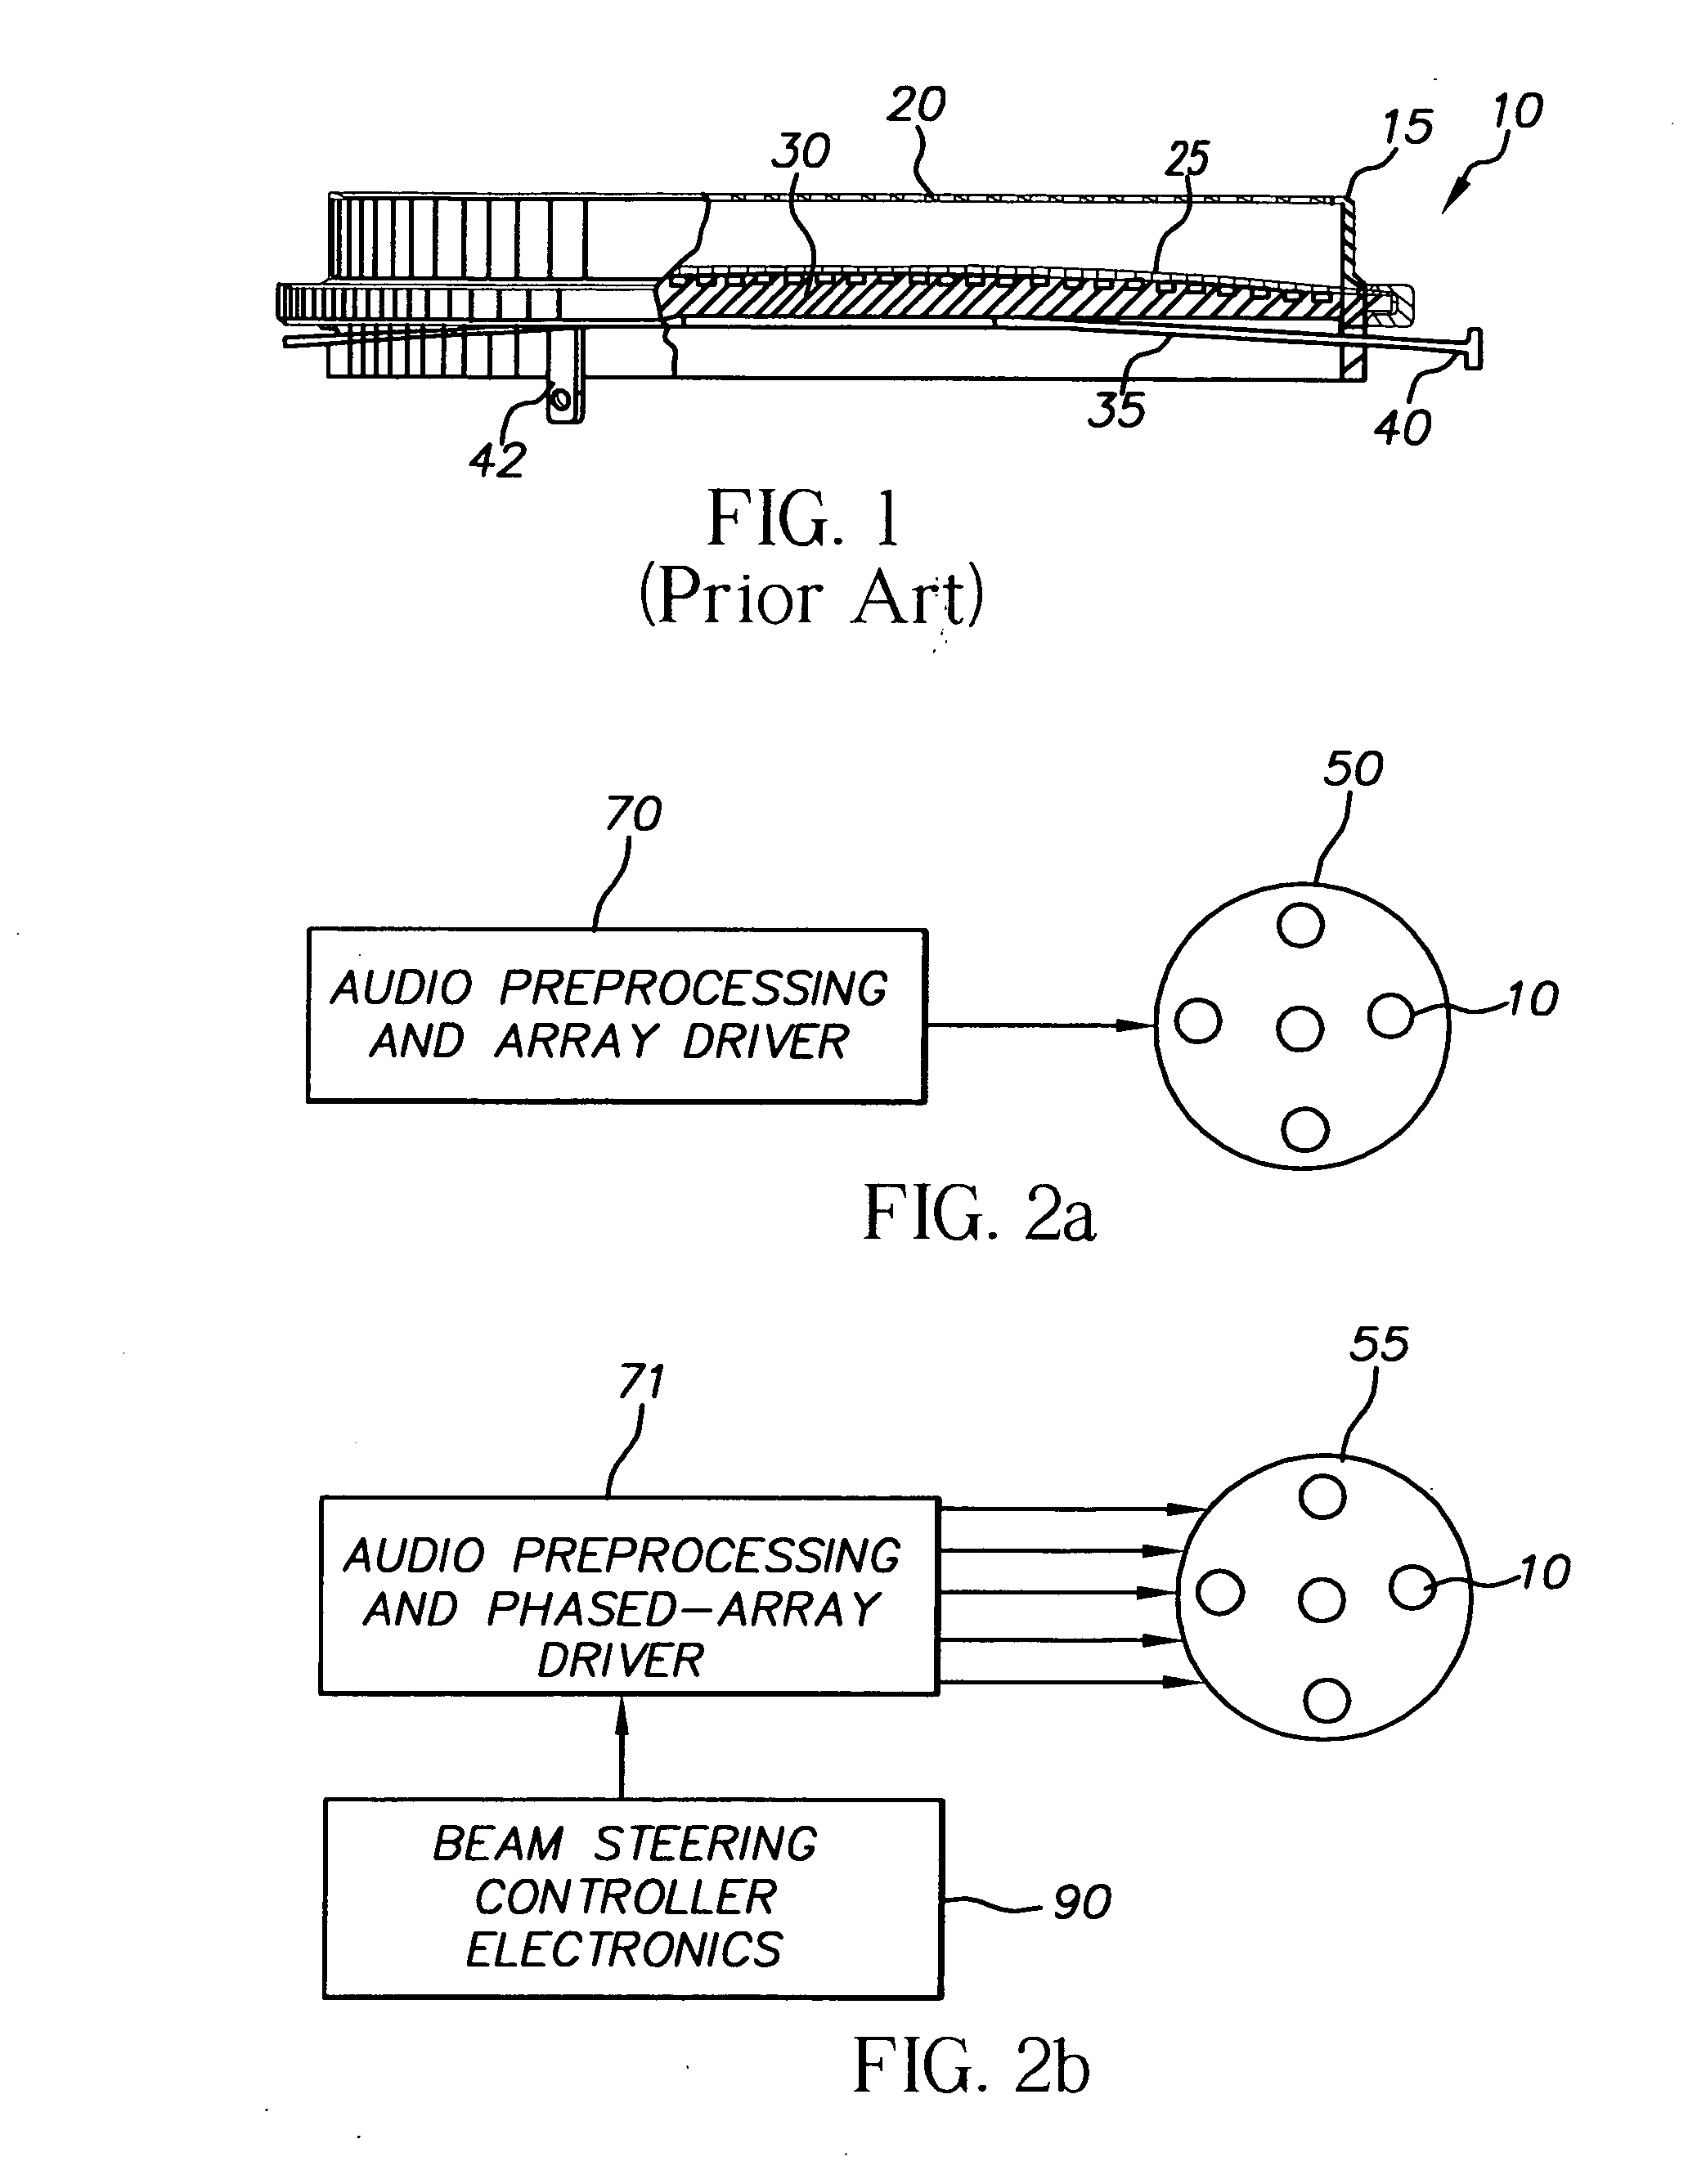 Display system and method with multi-person presentation function